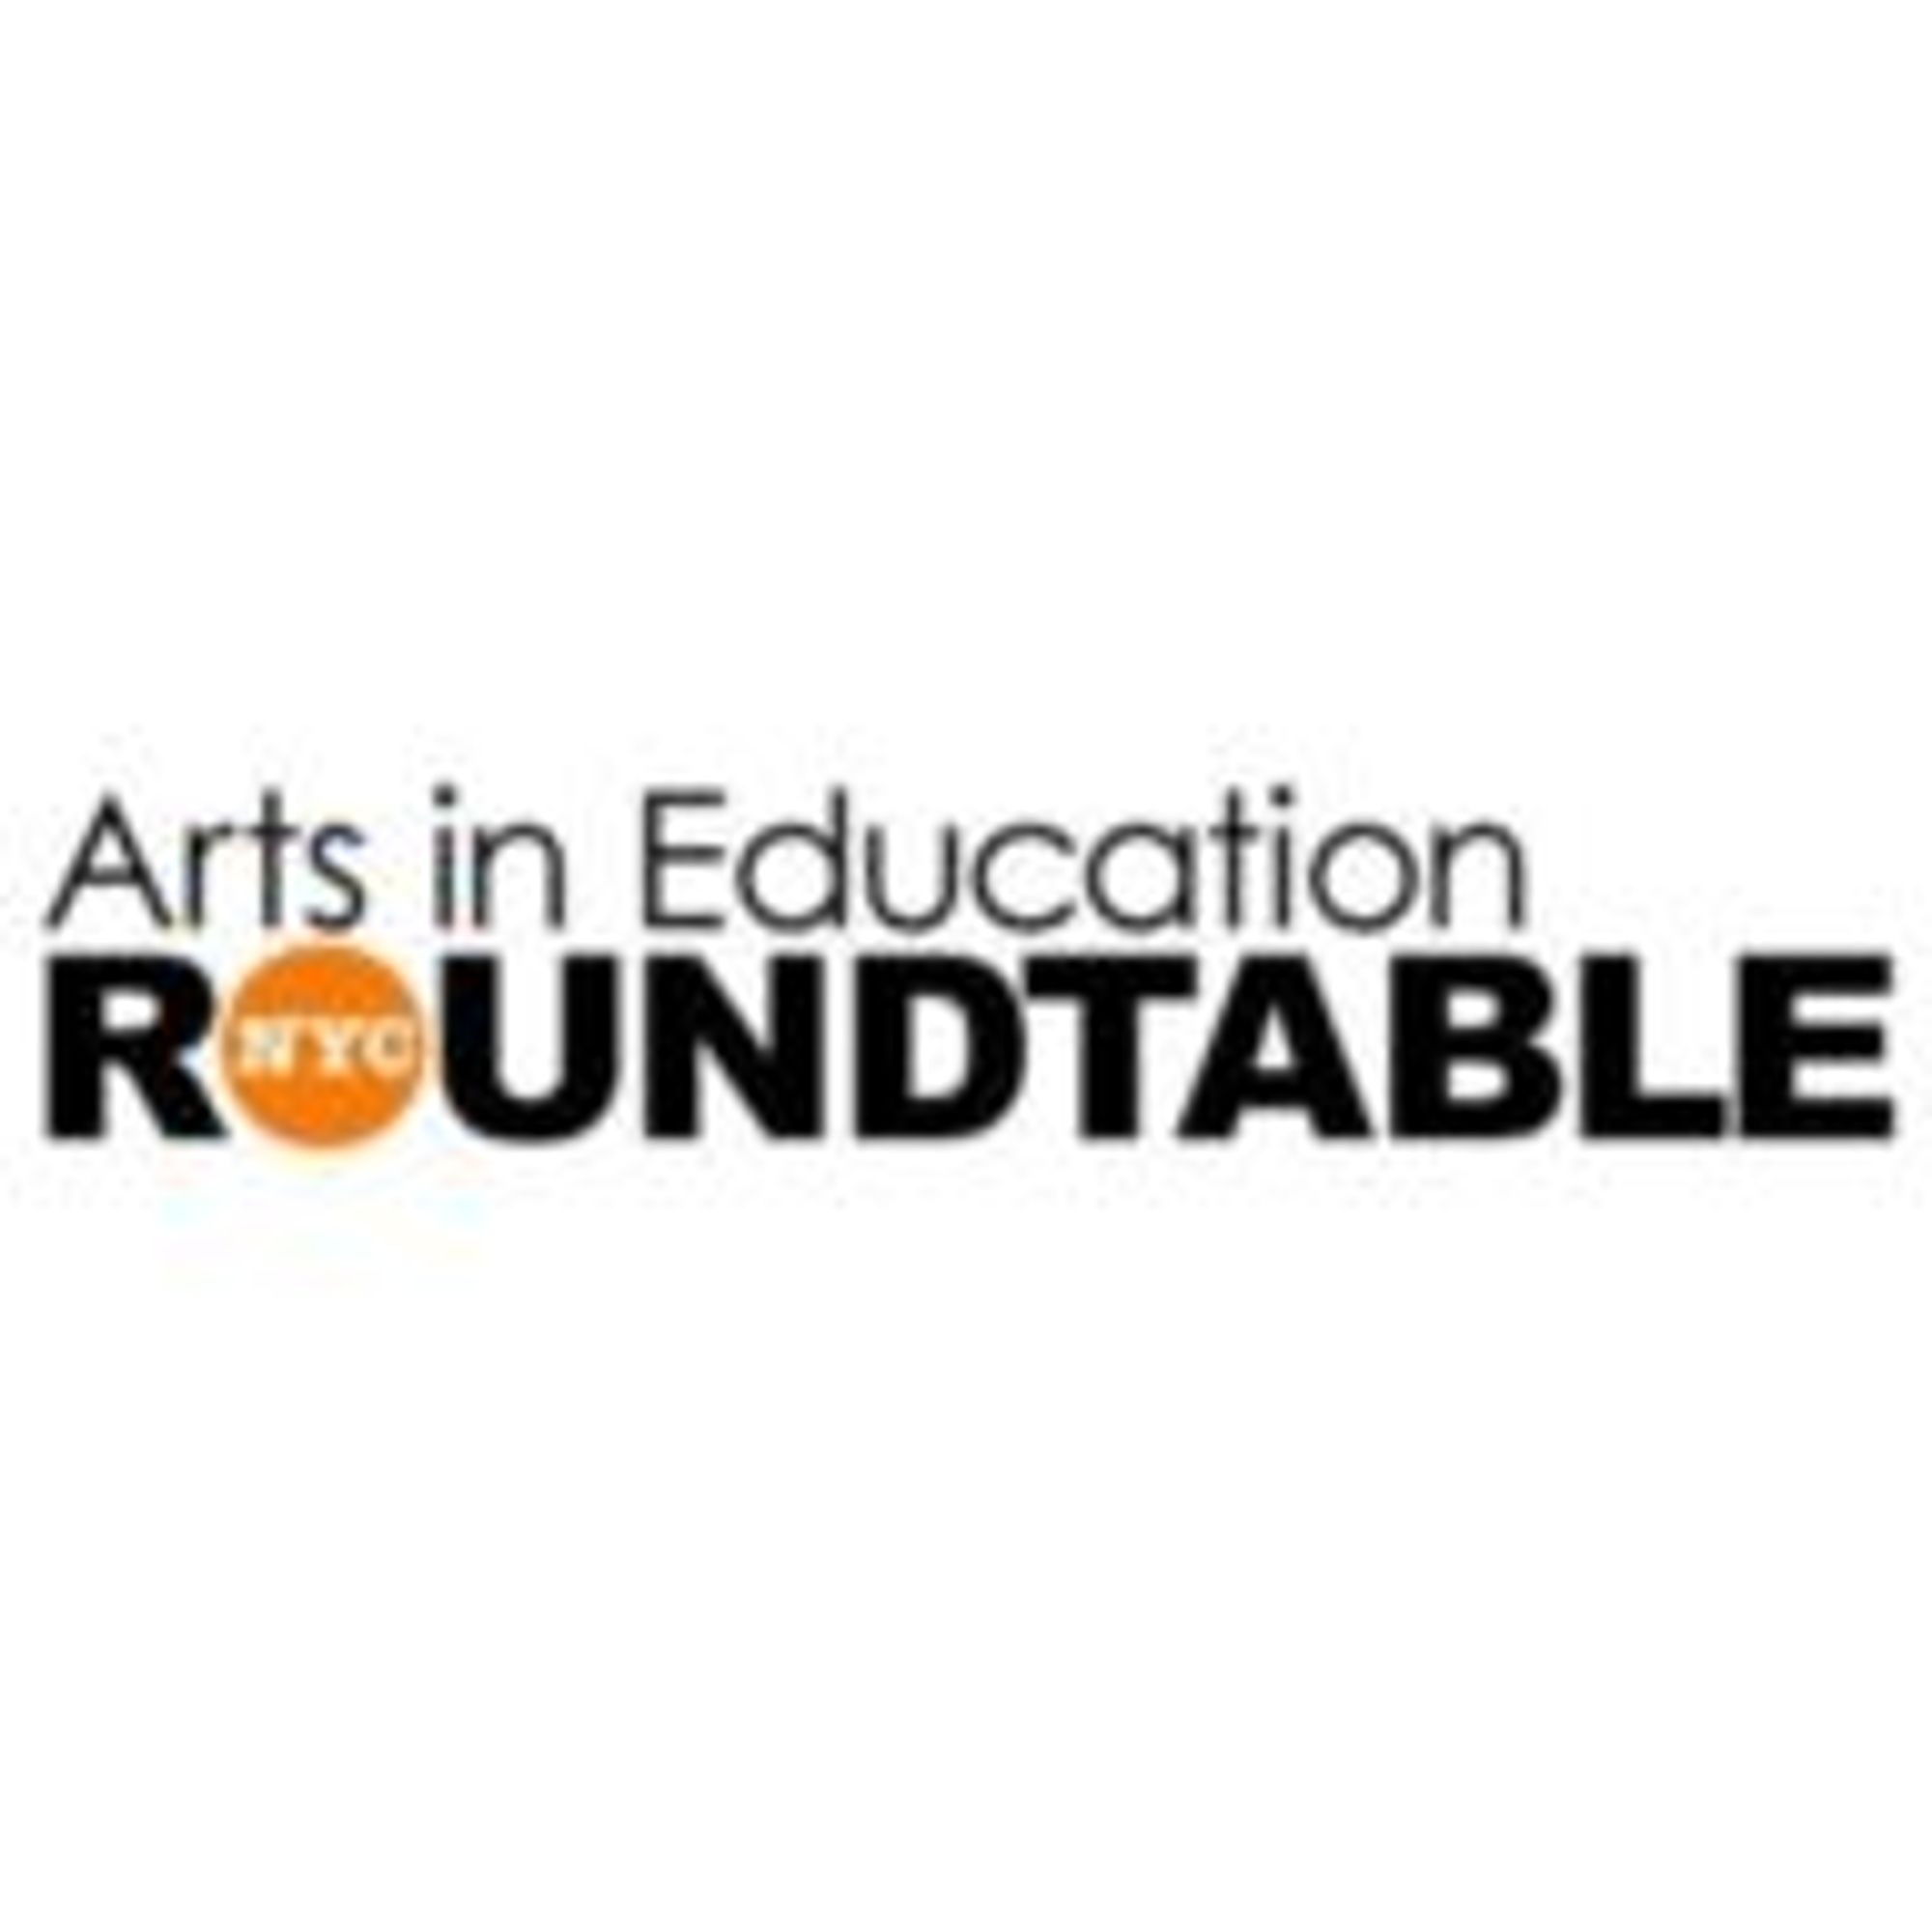 Decolonizing the Arts Classroom - NYC Arts in Education Roundtable